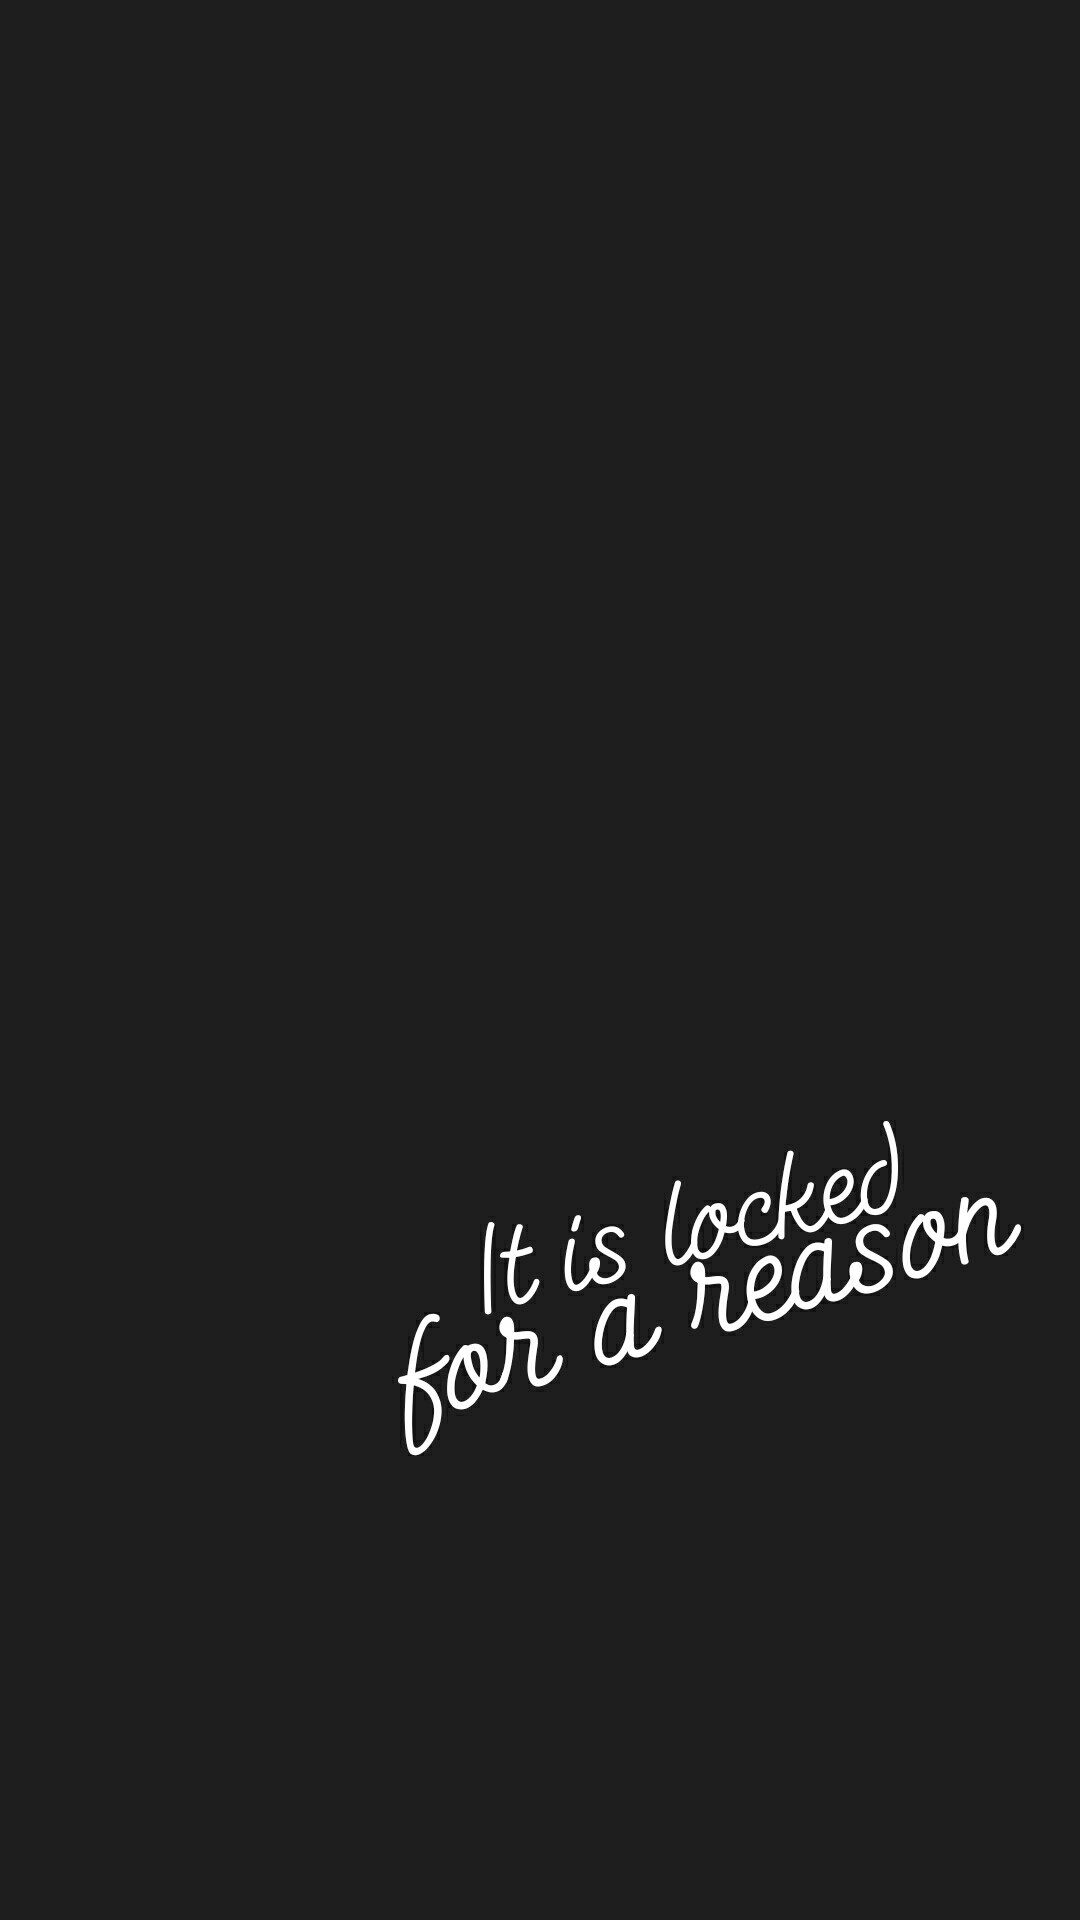 Locked For Reason Tap To See More Locked Phone Wallpapers Mobile9 1080x1920